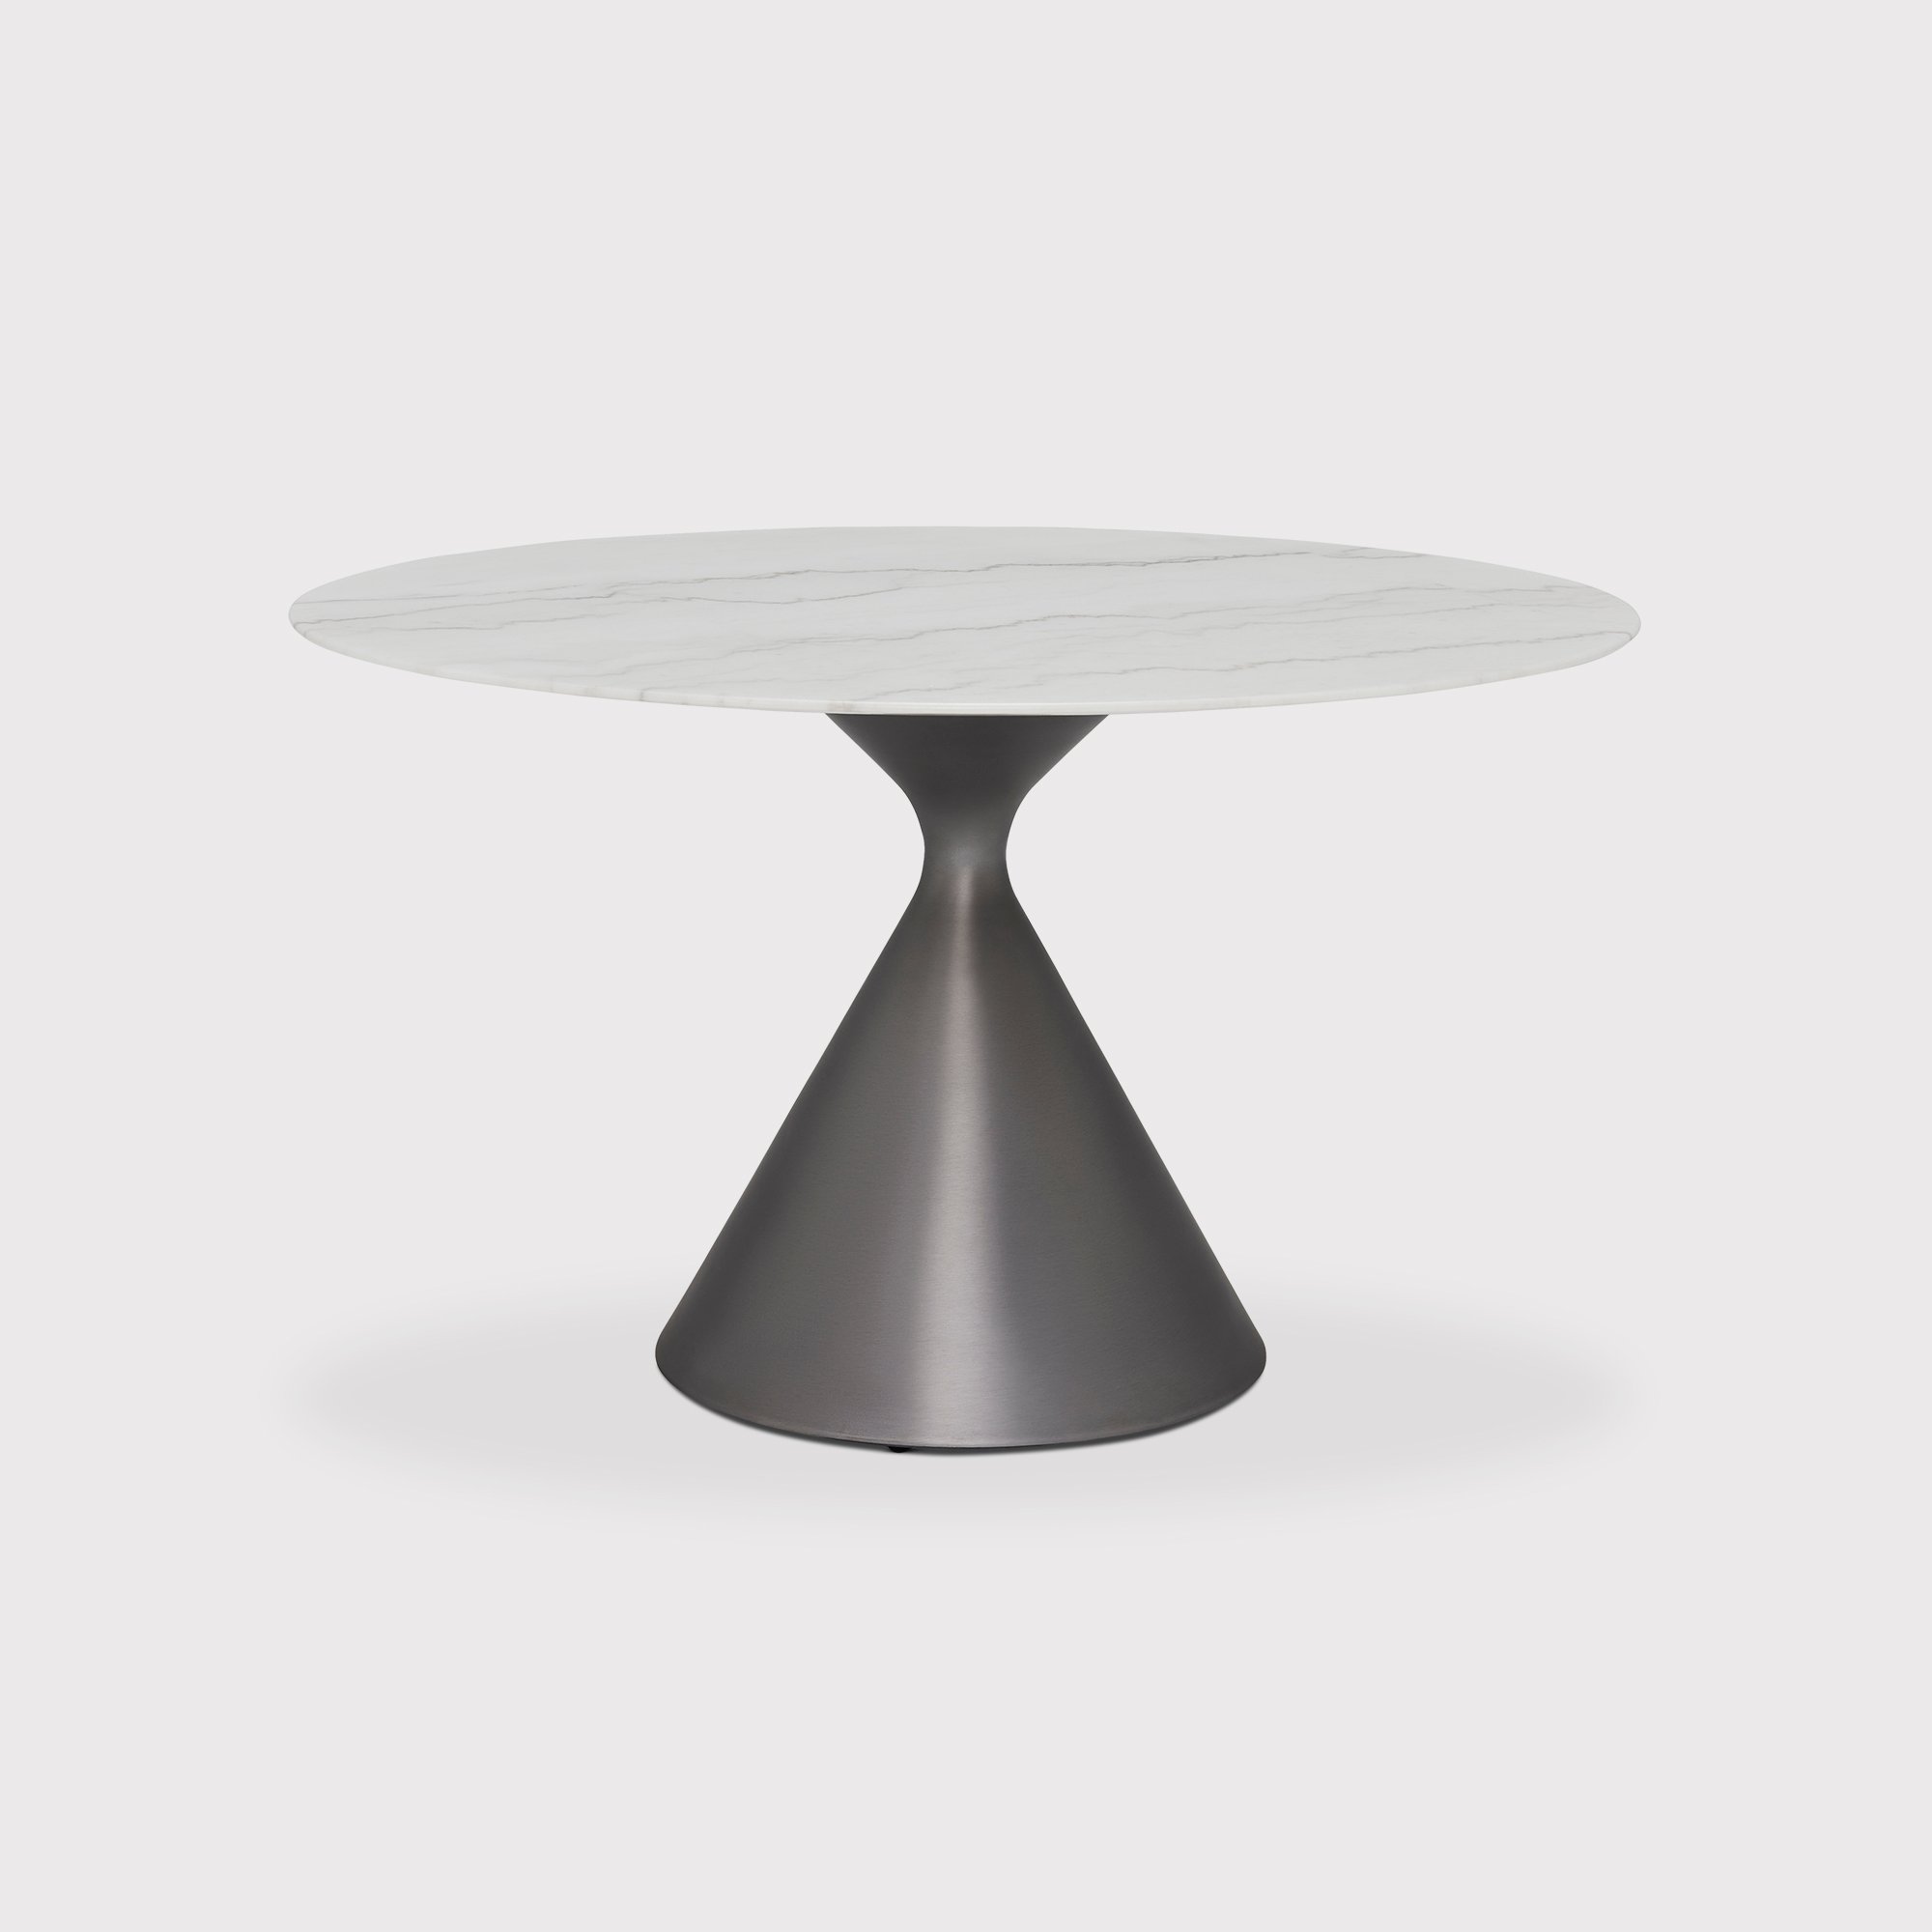 Krista Round Dining Table 130cm, Grey | Barker & Stonehouse